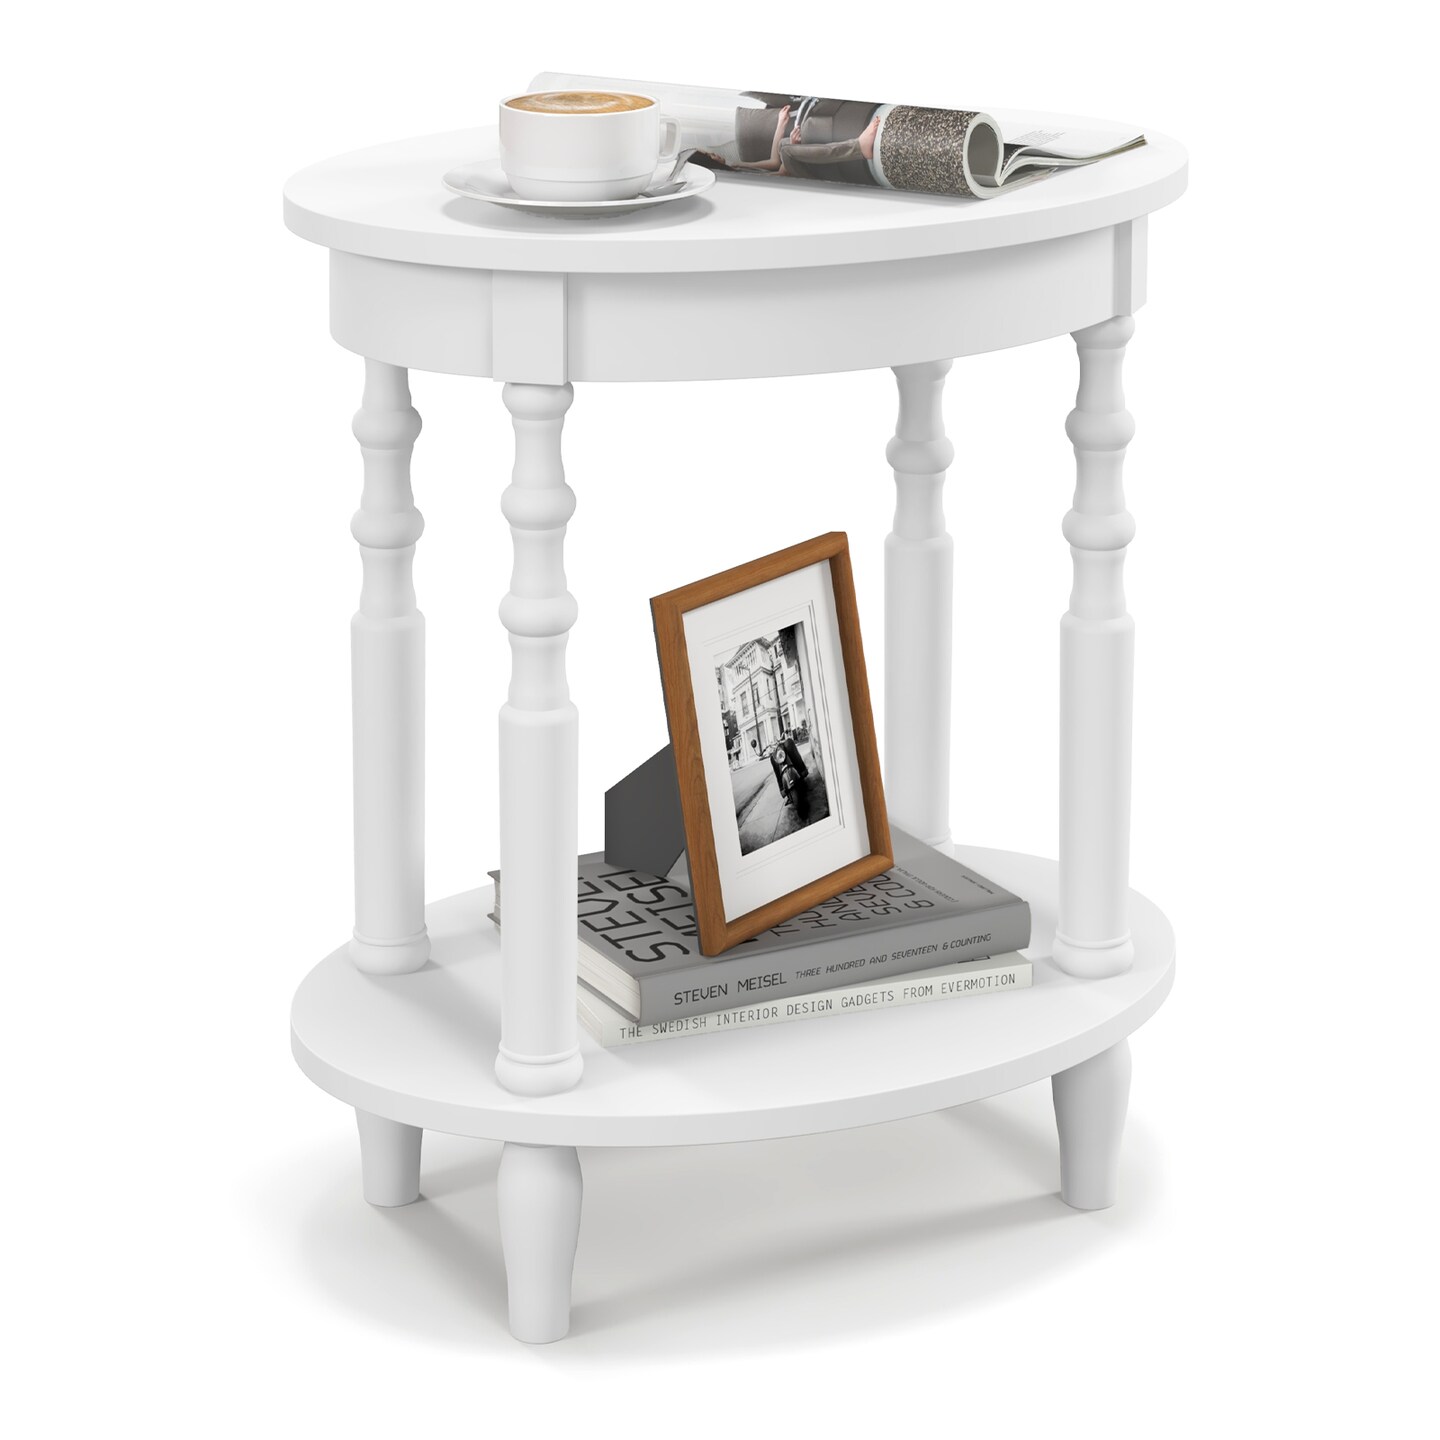 2-tier Oval Side Table With Storage Shelf And Solid Wood Legs